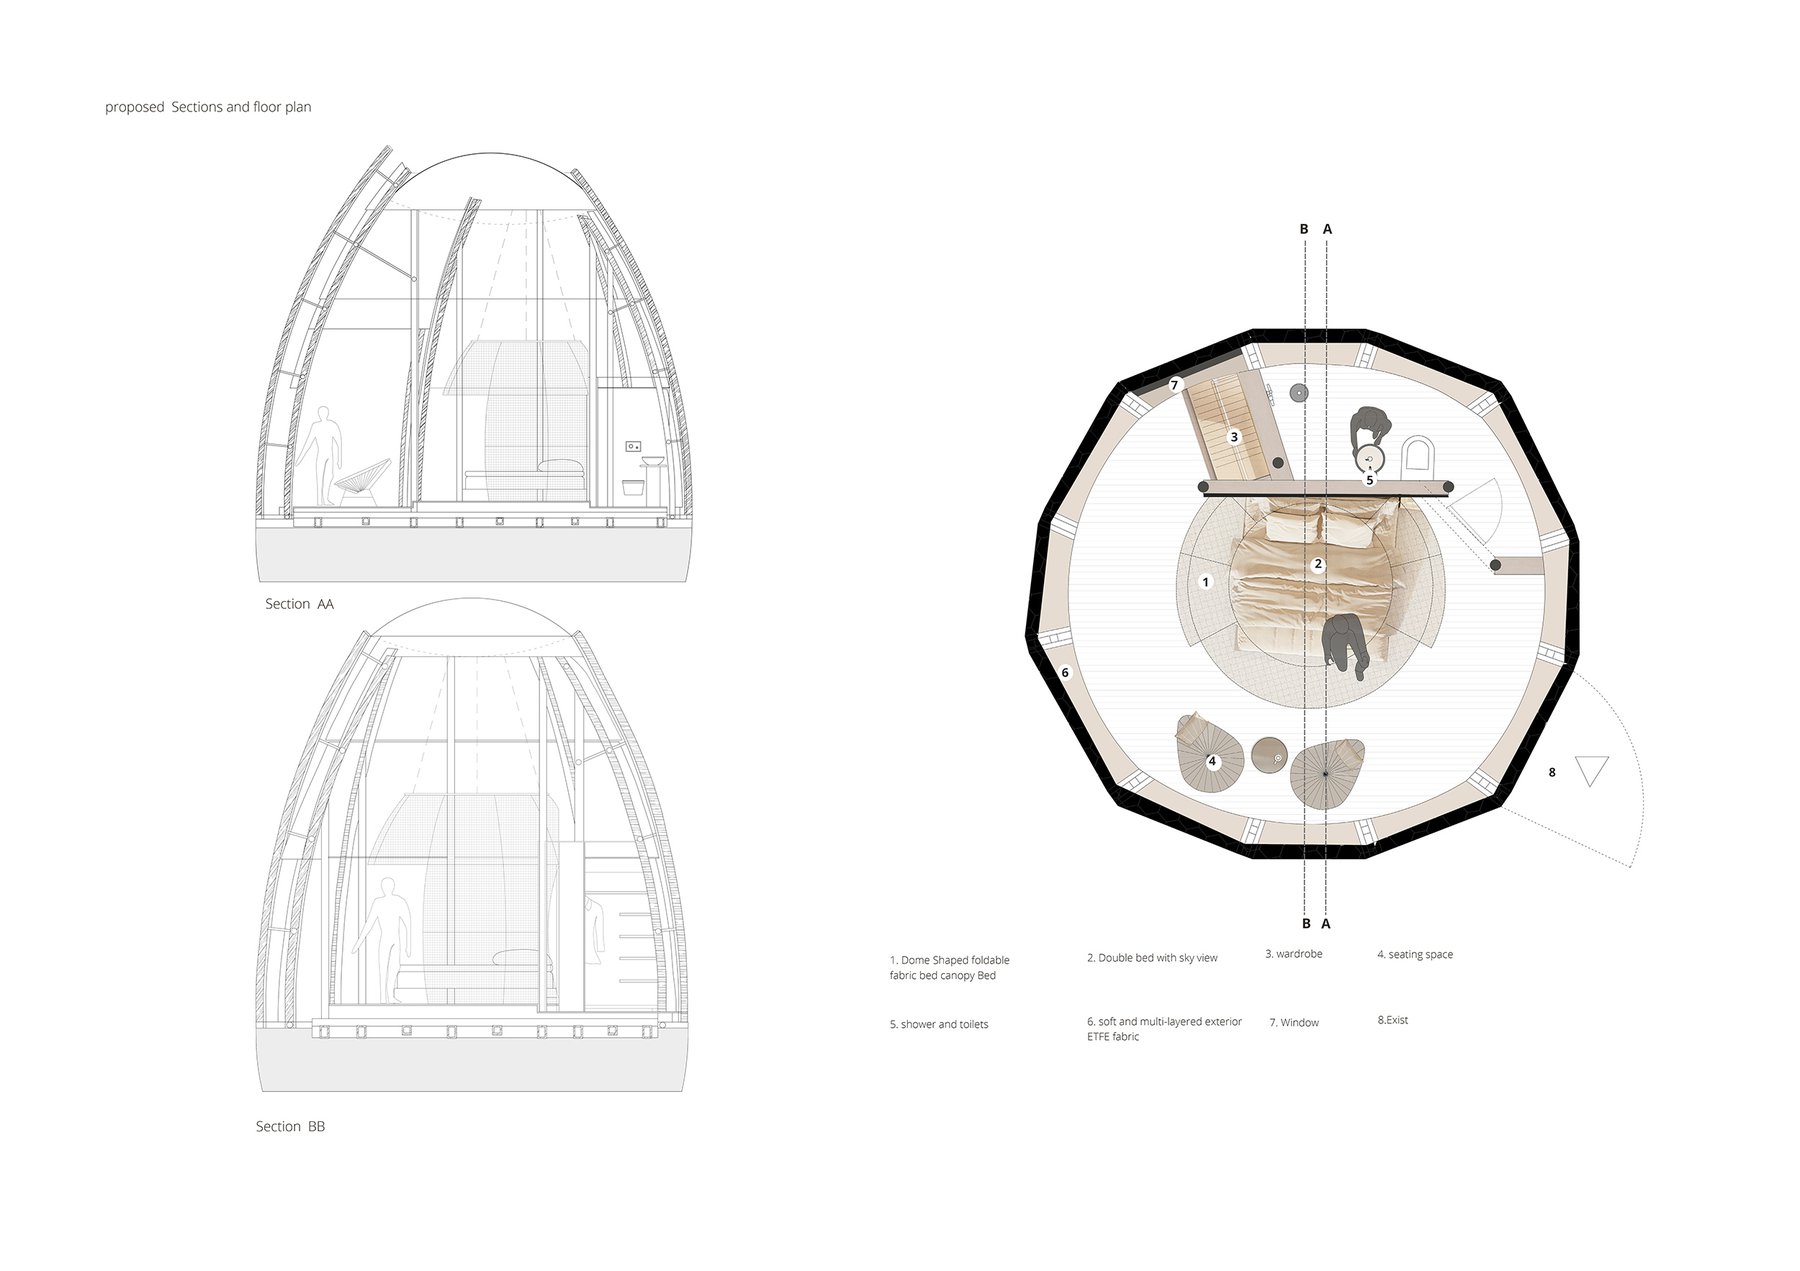 Orthographic drawing of a proposed homeless pod for the roof of Euston Station